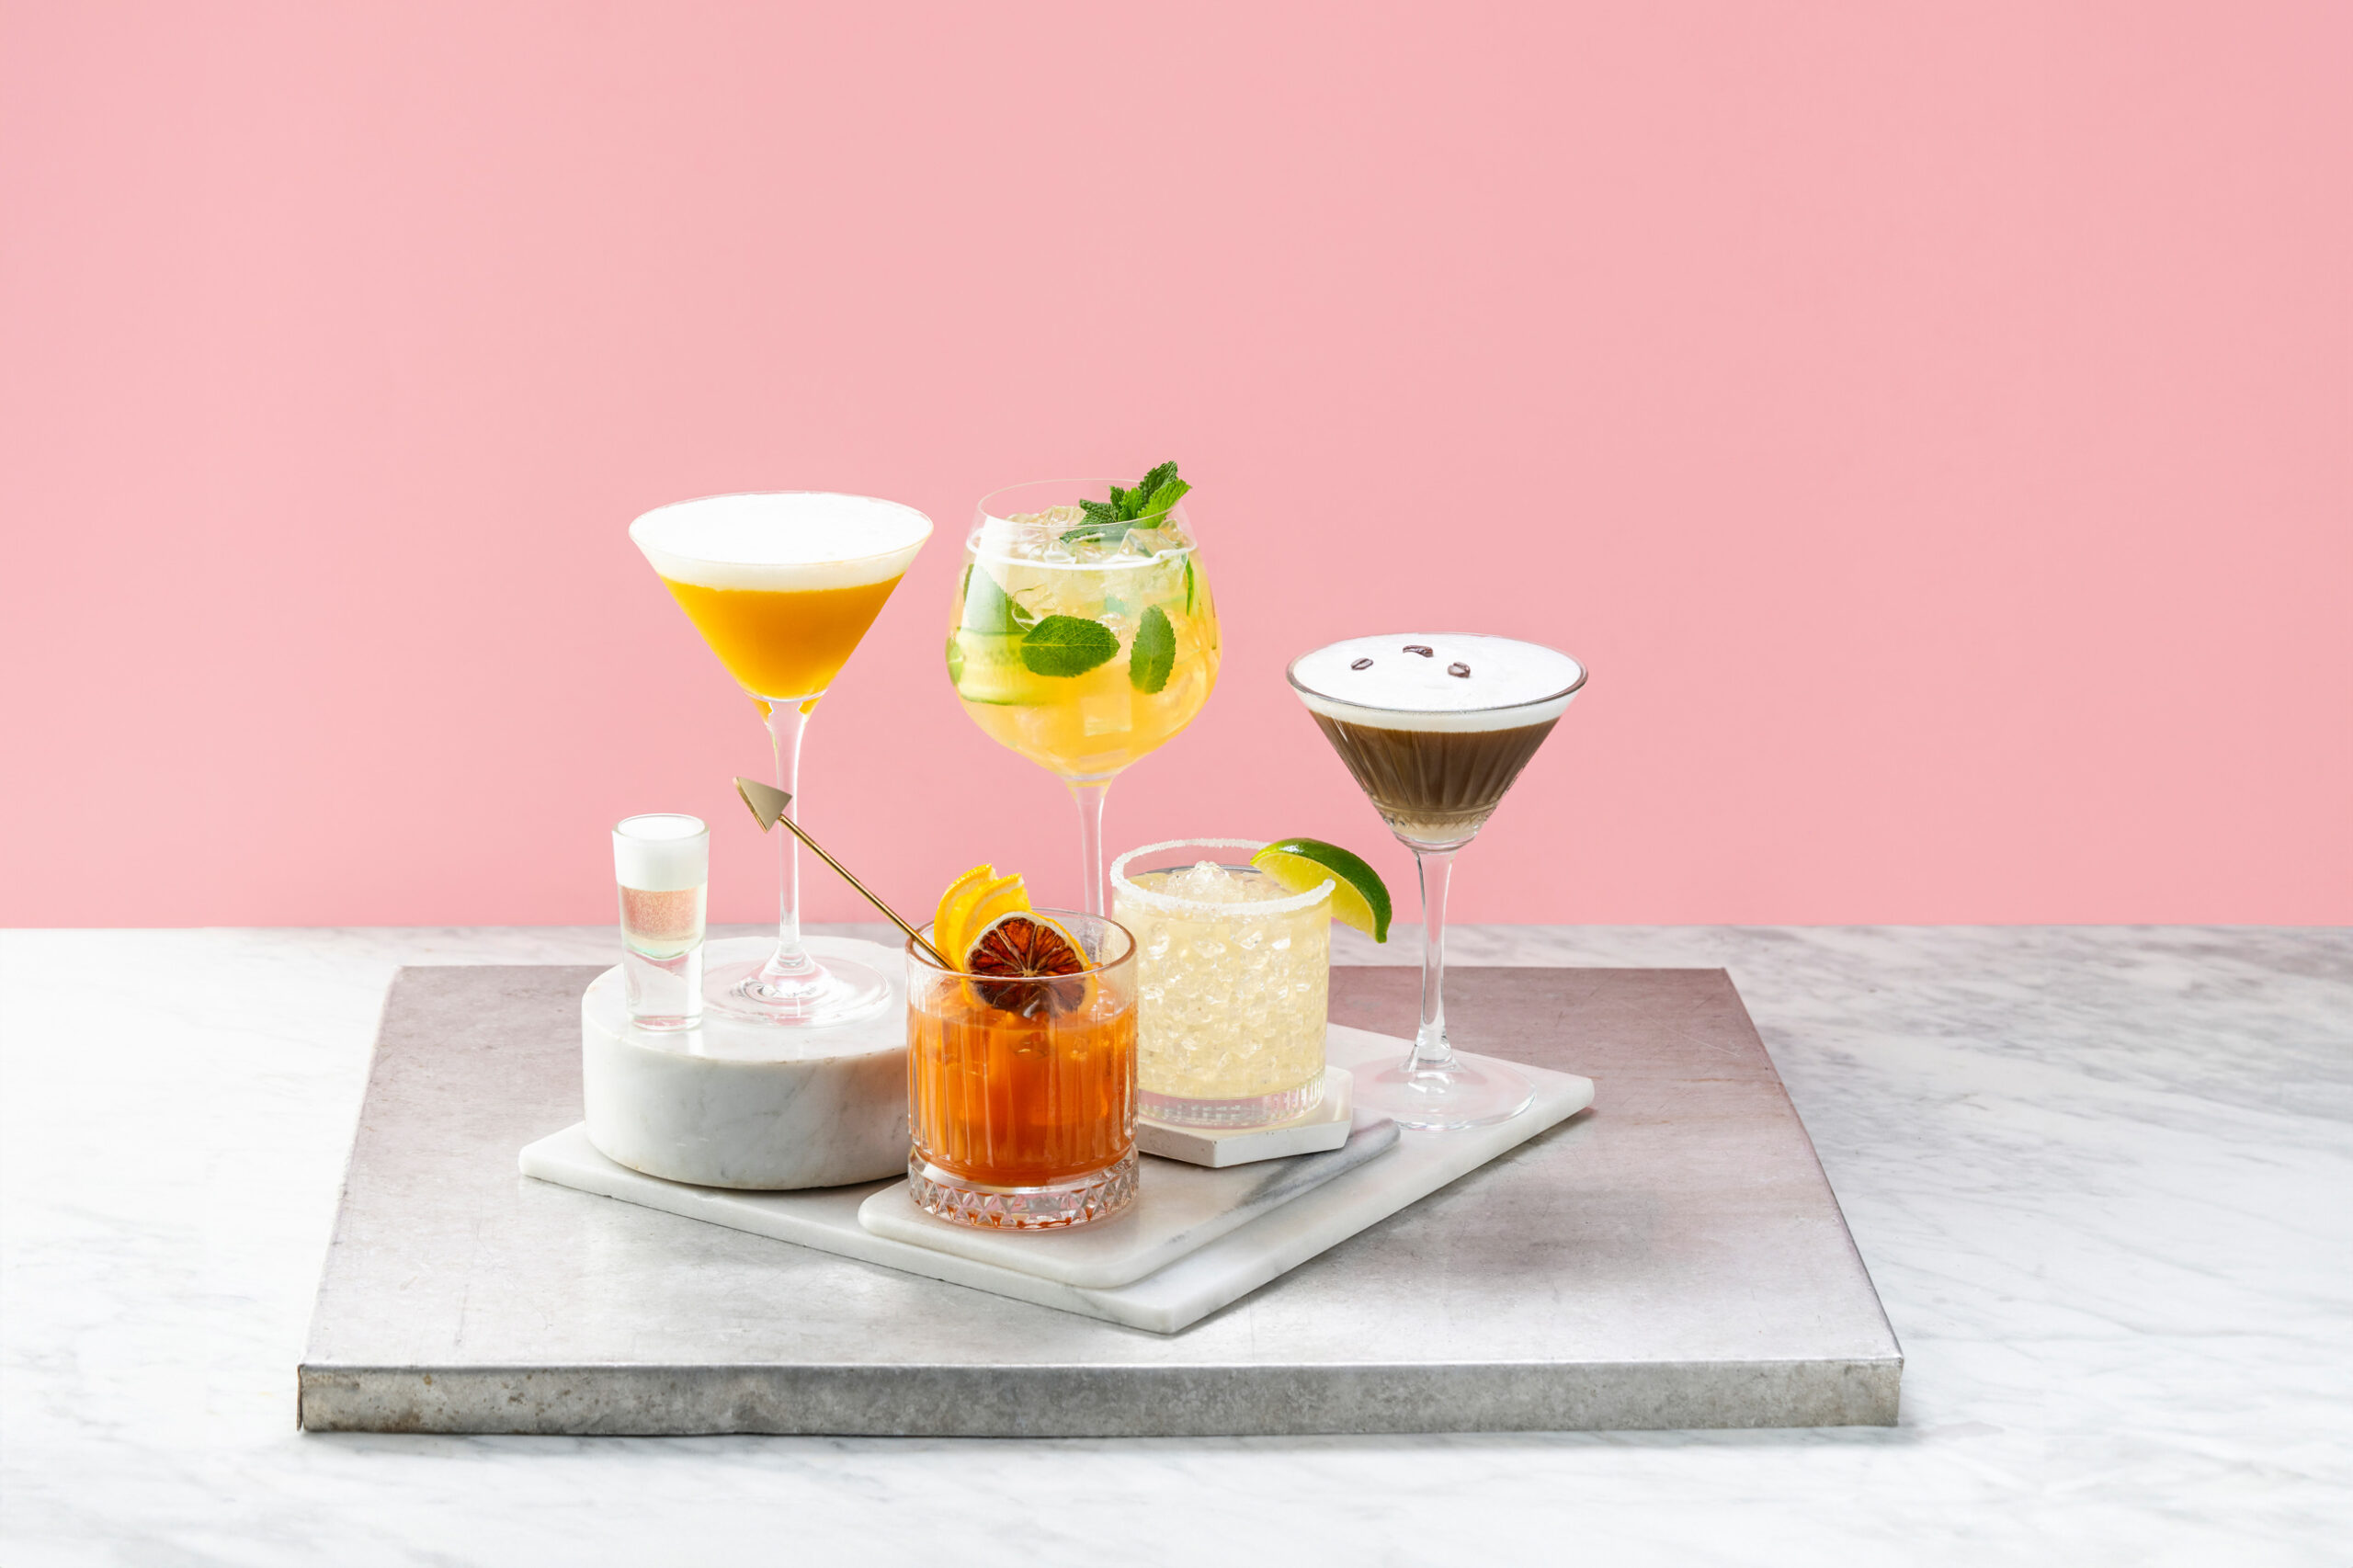 https://www.drakeandmorgan.co.uk/the-refinery-bankside/wp-content/uploads/2020/07/Cocktail-Grp-002-scaled.jpg